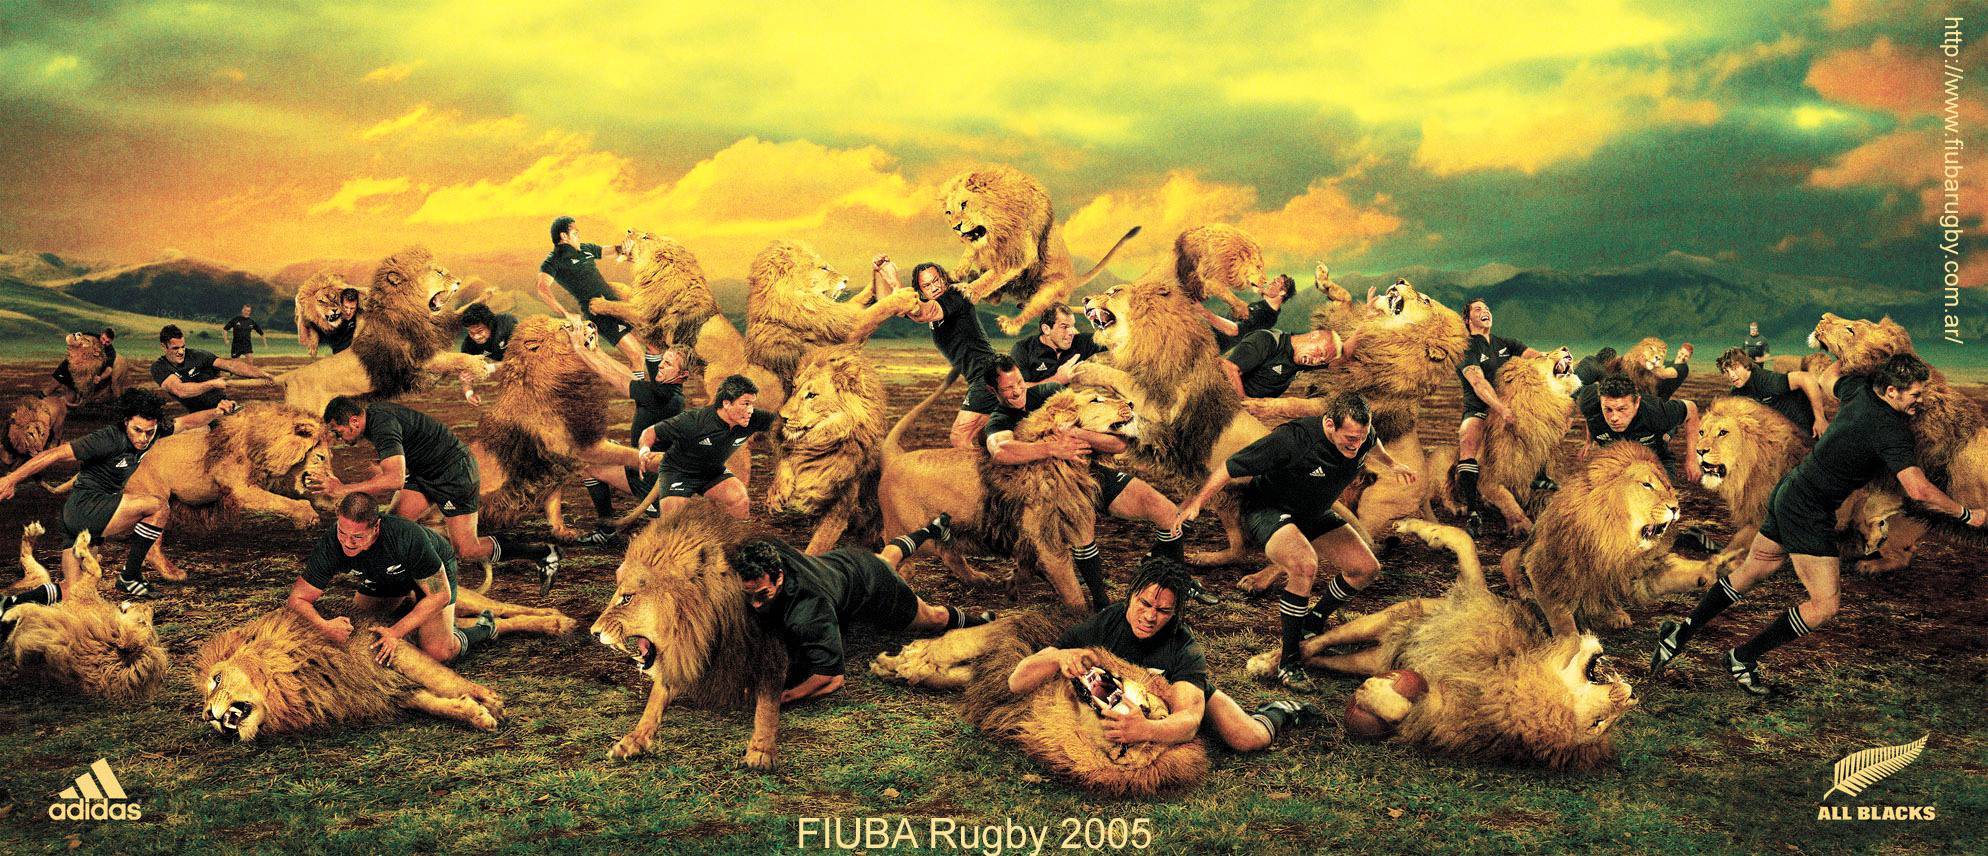 Rugby Wallpaper, Image, Wallpaper of Rugby in HD Widescreen